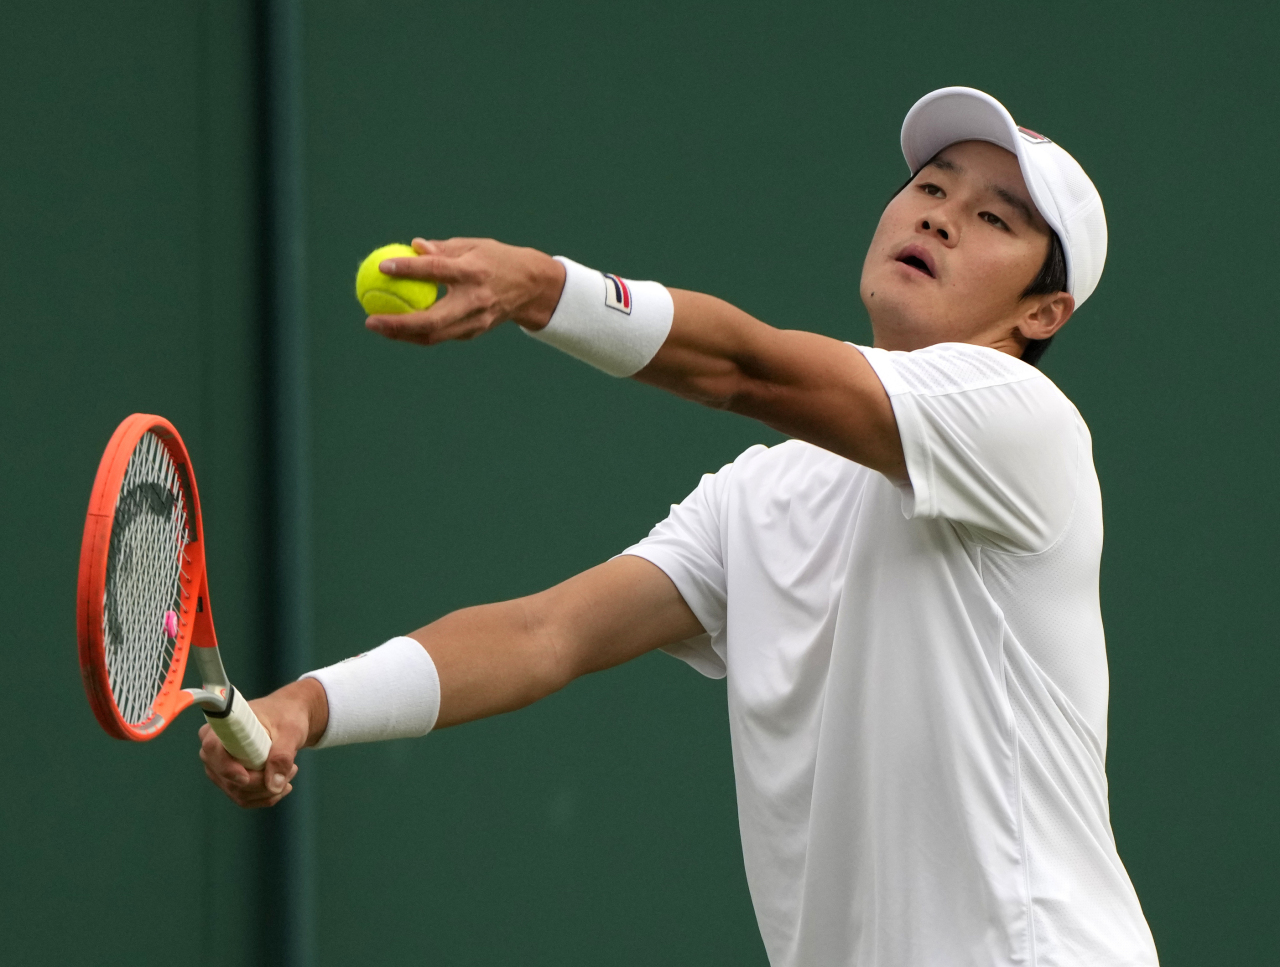 In this Associated Press photo, Kwon Soon-woo of South Korea hits a return to Daniel Masur of Germany during their men's singles match at Wimbledon at the All England Club in London on Monday. (AP-Yonhap)